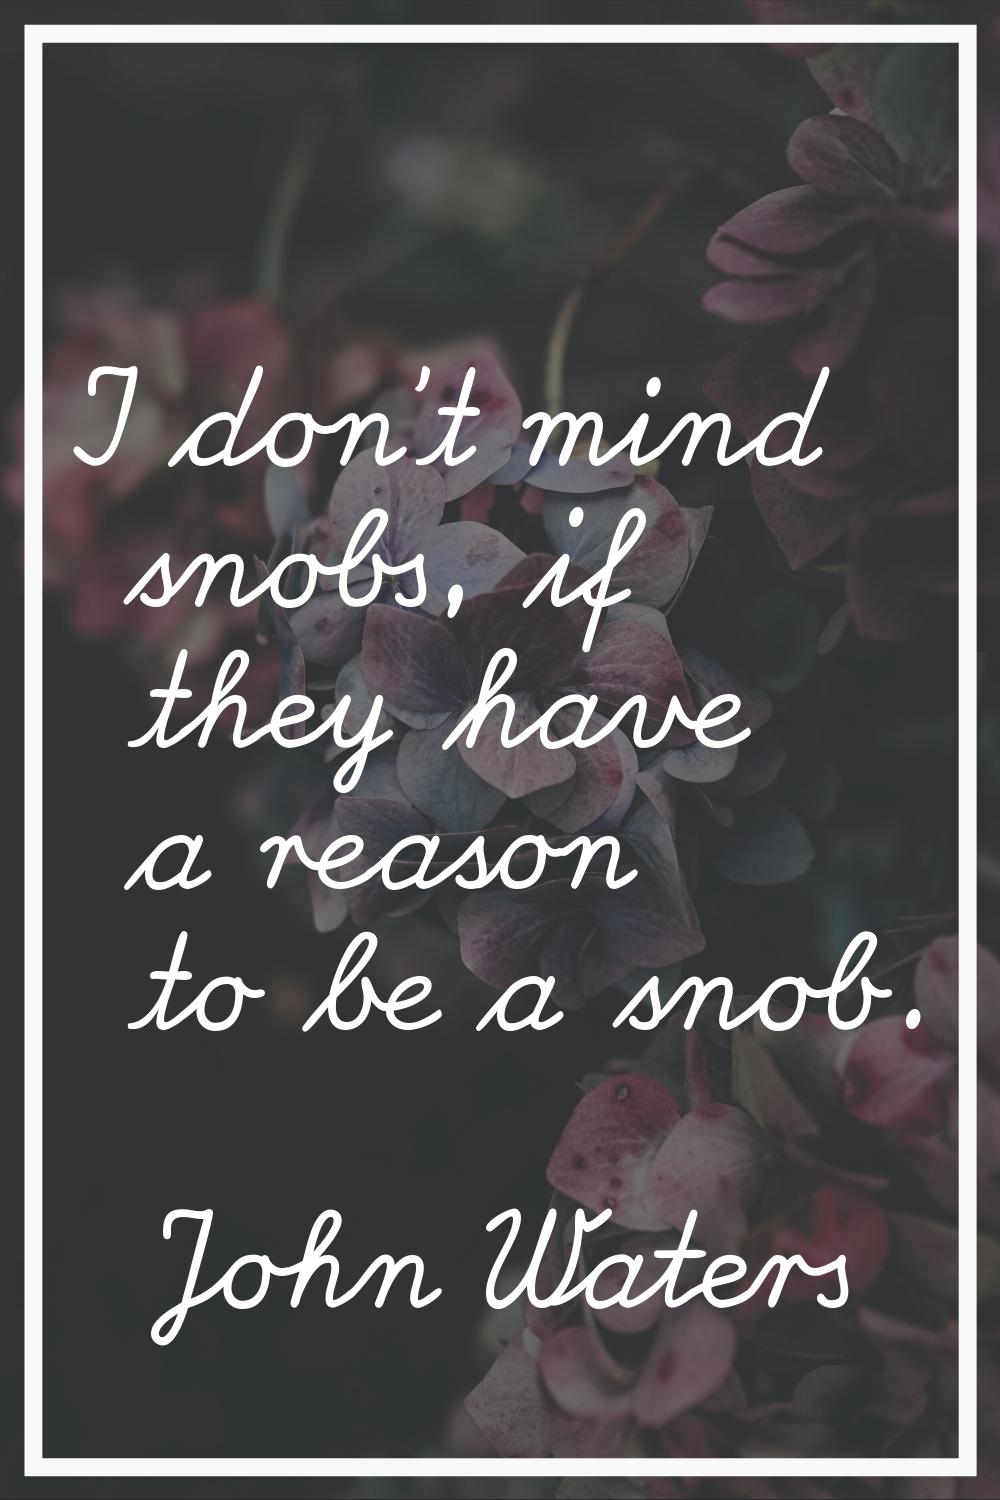 I don't mind snobs, if they have a reason to be a snob.